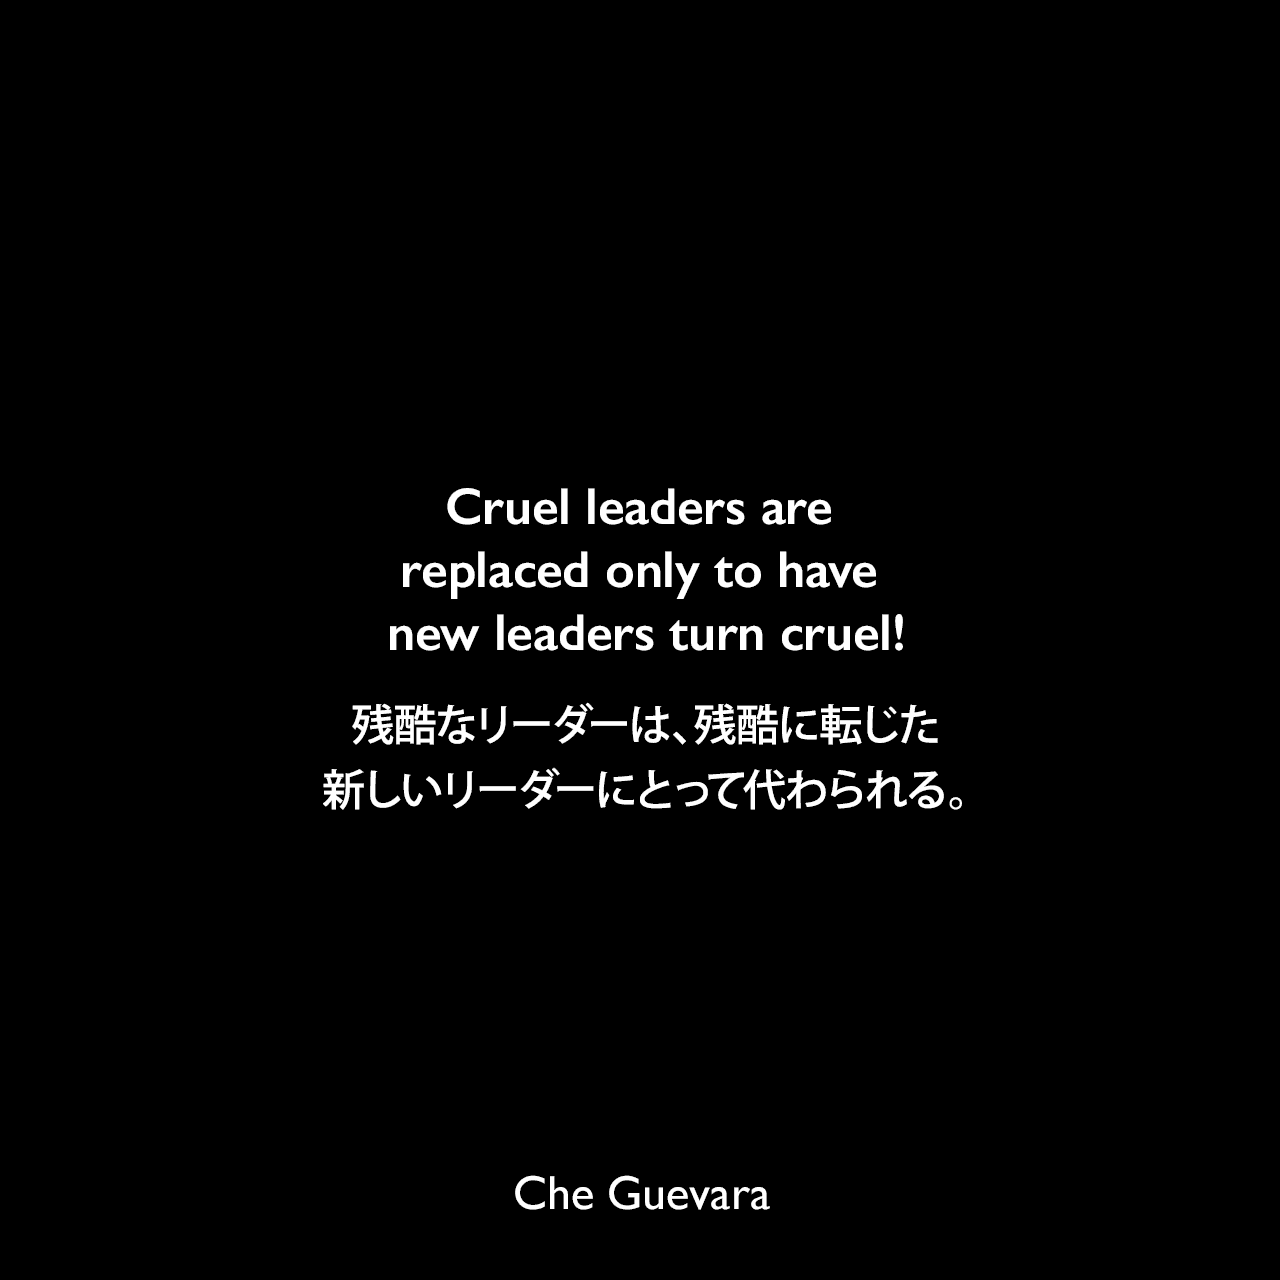 Cruel leaders are replaced only to have new leaders turn cruel!残酷なリーダーは、残酷に転じた新しいリーダーにとって代わられる。- J・フラッシュによる本「An American Savage」よりChe Guevara